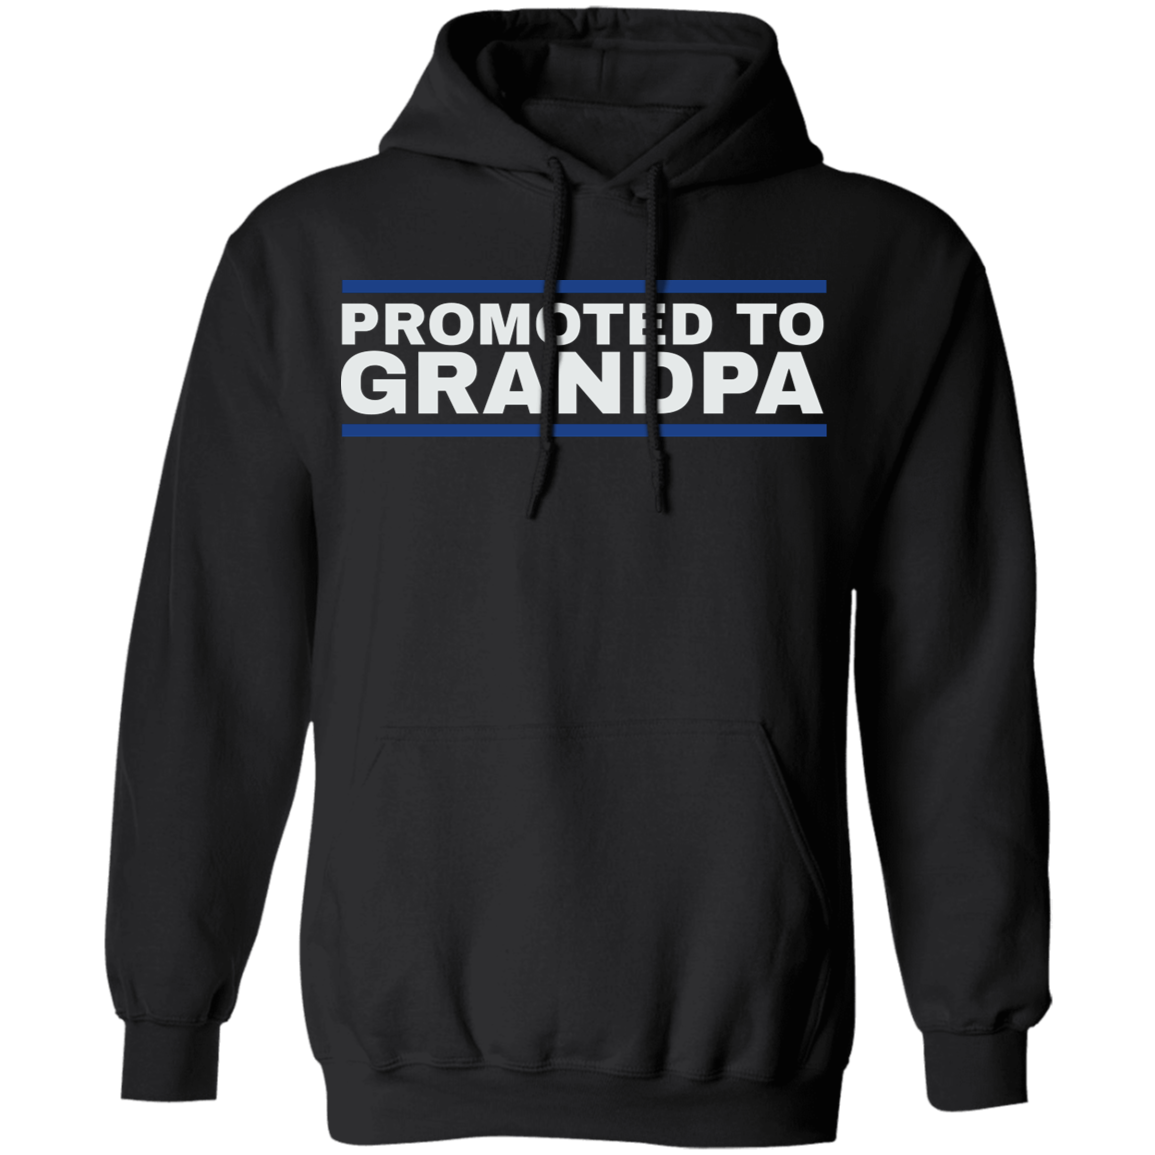 Promoted to Grandpa Hoodie